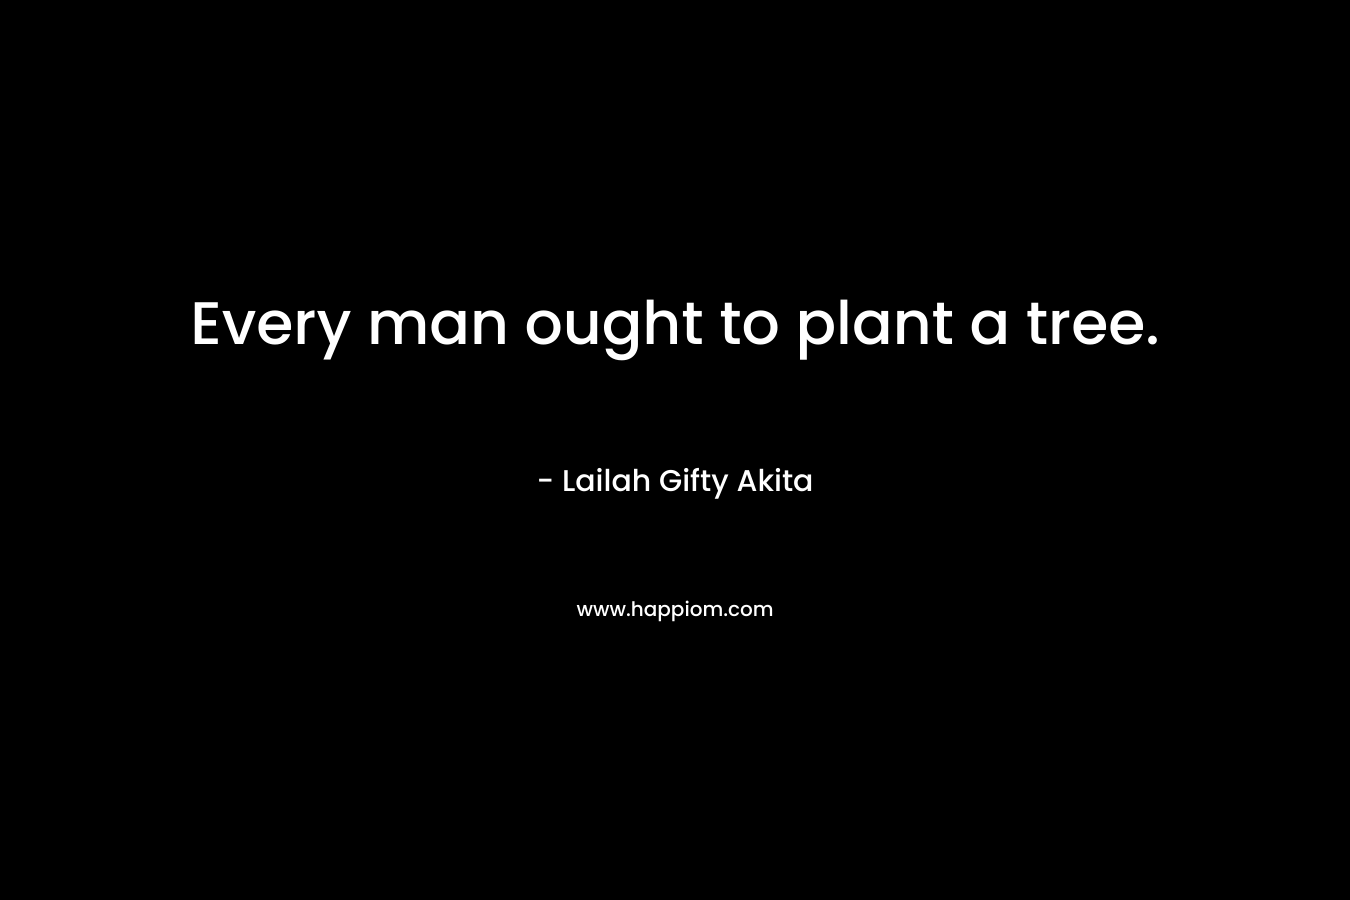 Every man ought to plant a tree.